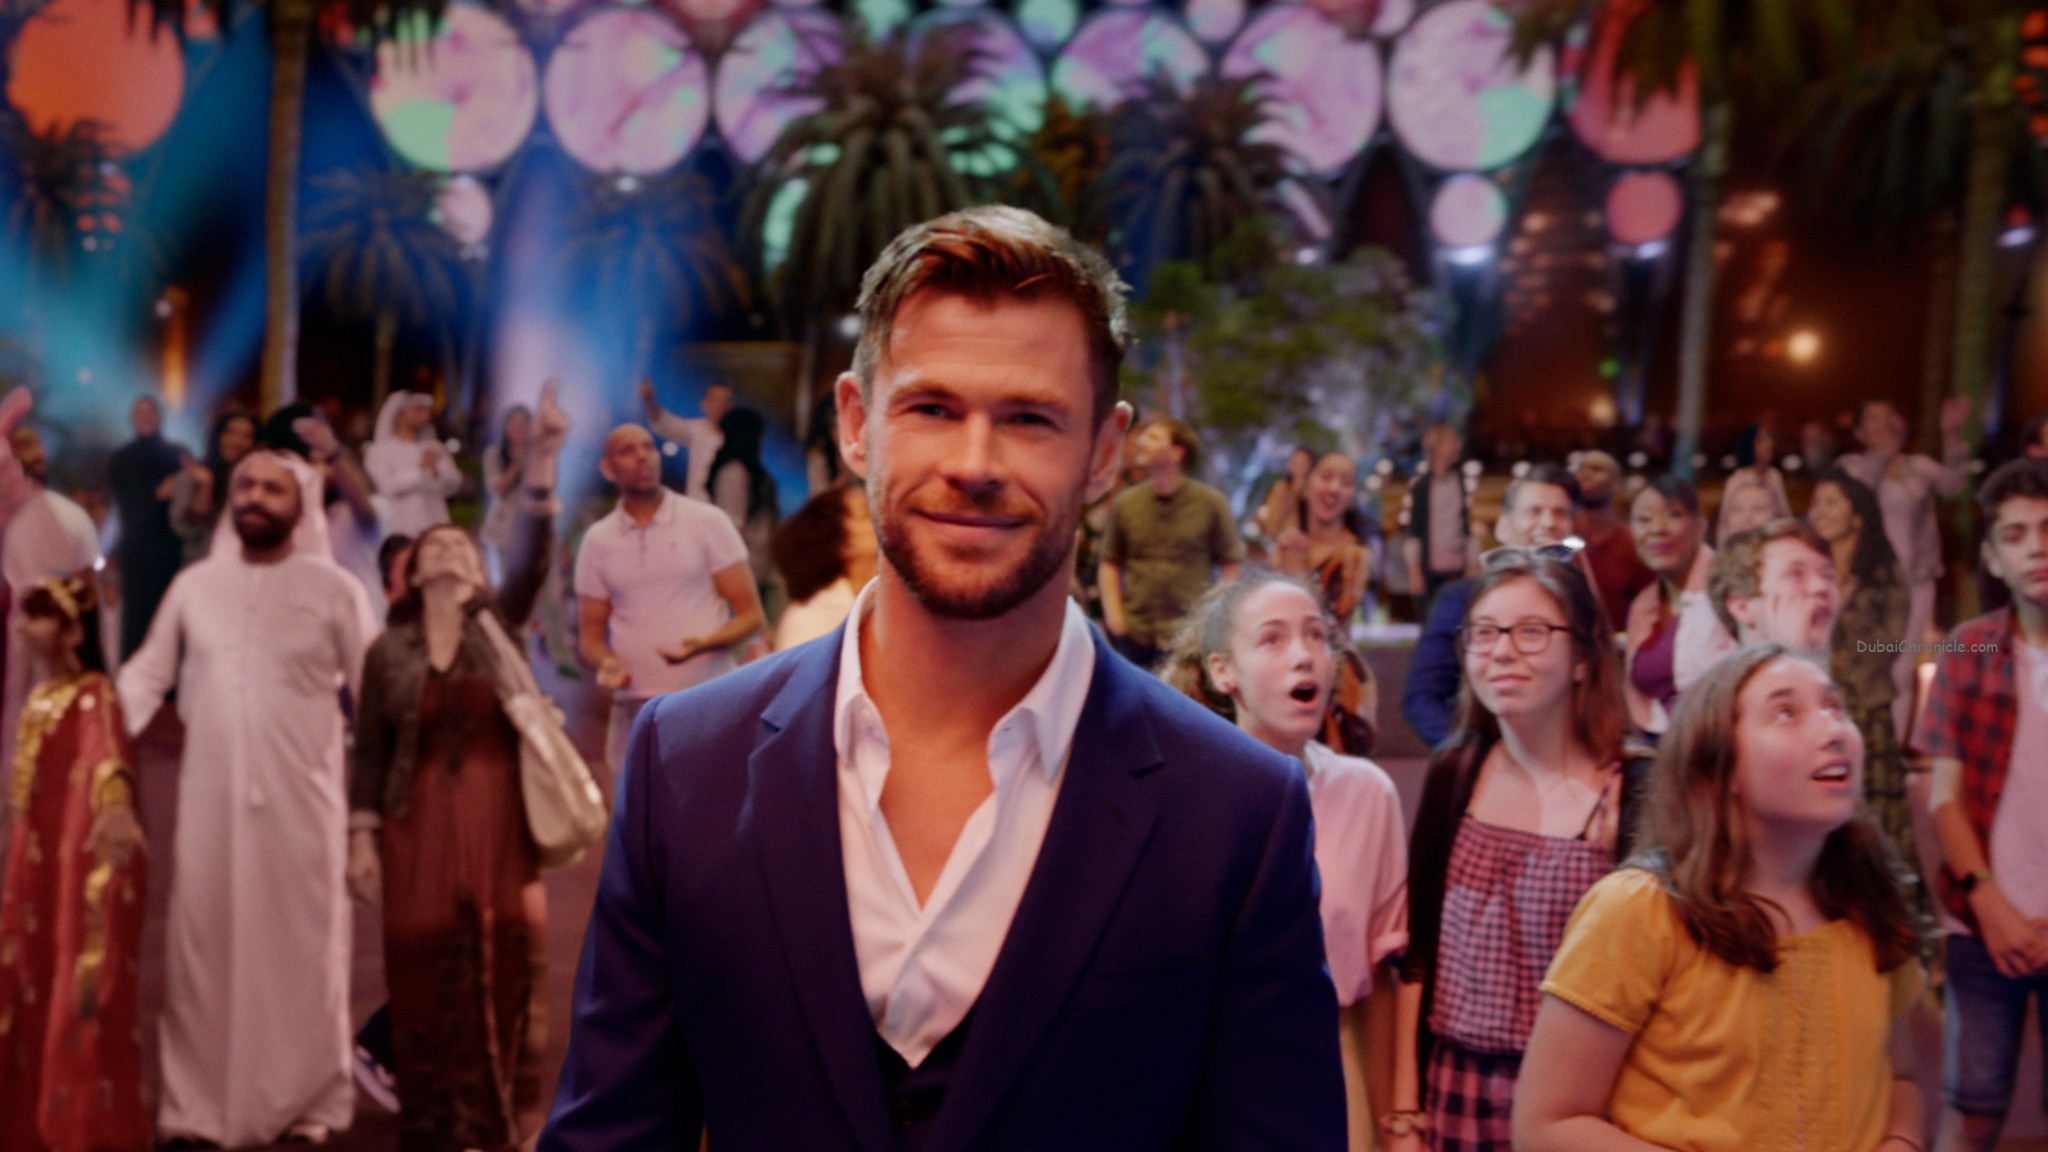 Emirates is inviting visitors to experience Expo 2020 Dubai's endless possibilities in a new global campaign fronted by actor Chris Hemsworth.